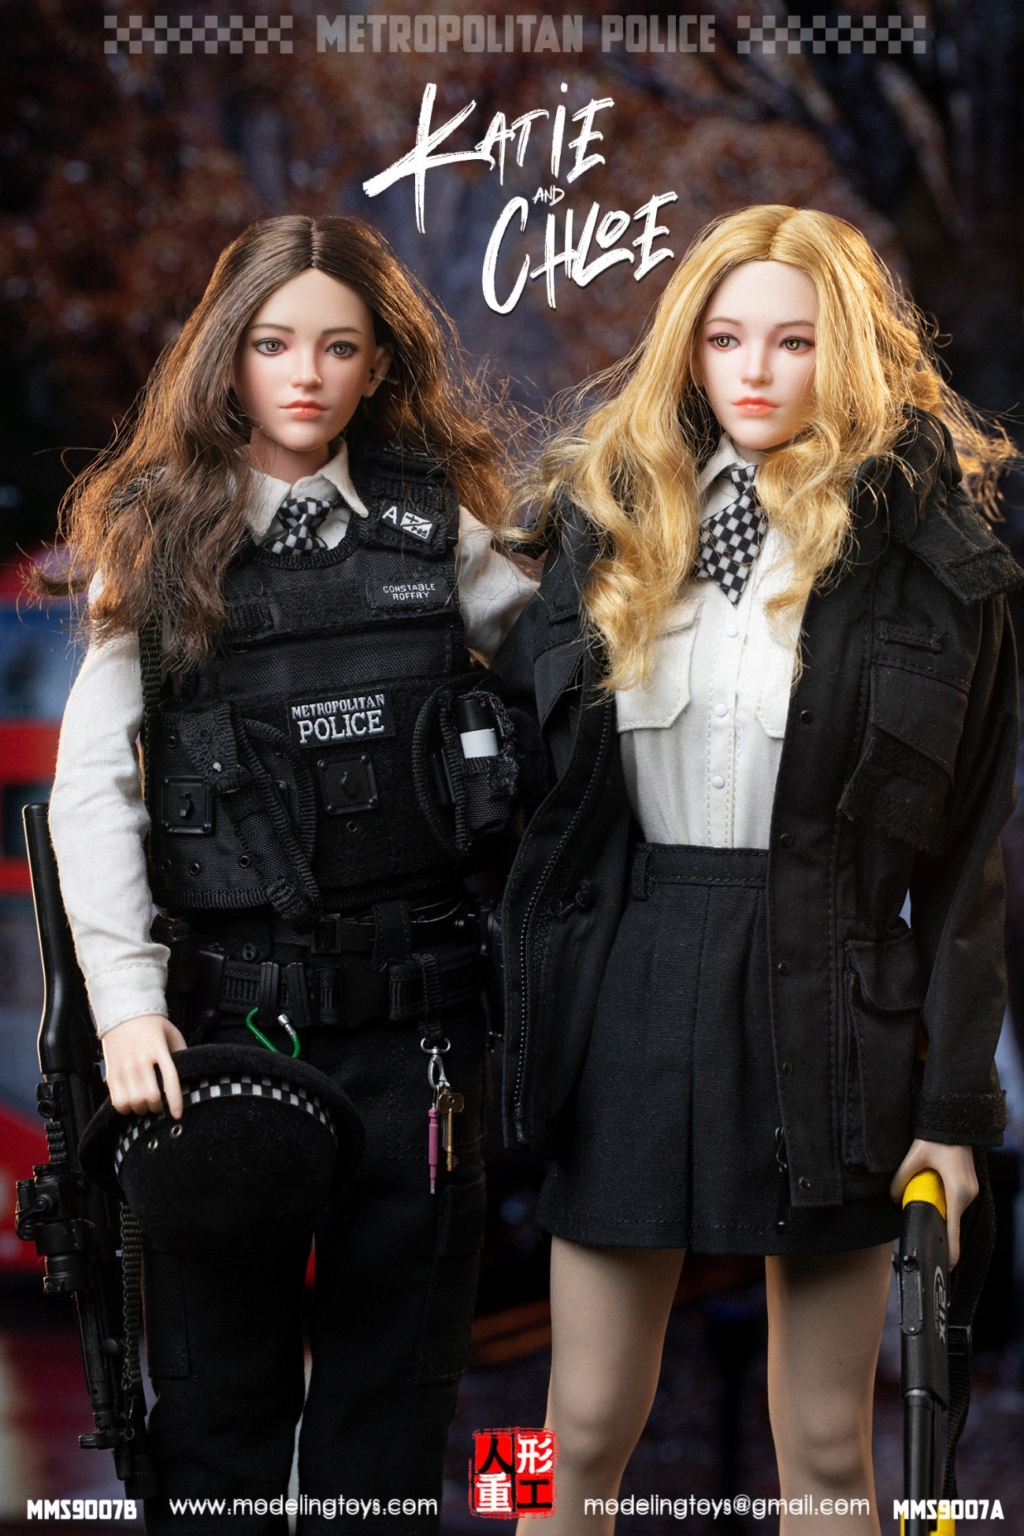 NEW PRODUCT: MODELING TOYS: 1/6 London Police Agency-Armed Police Chloe/Katy C4a8dc10